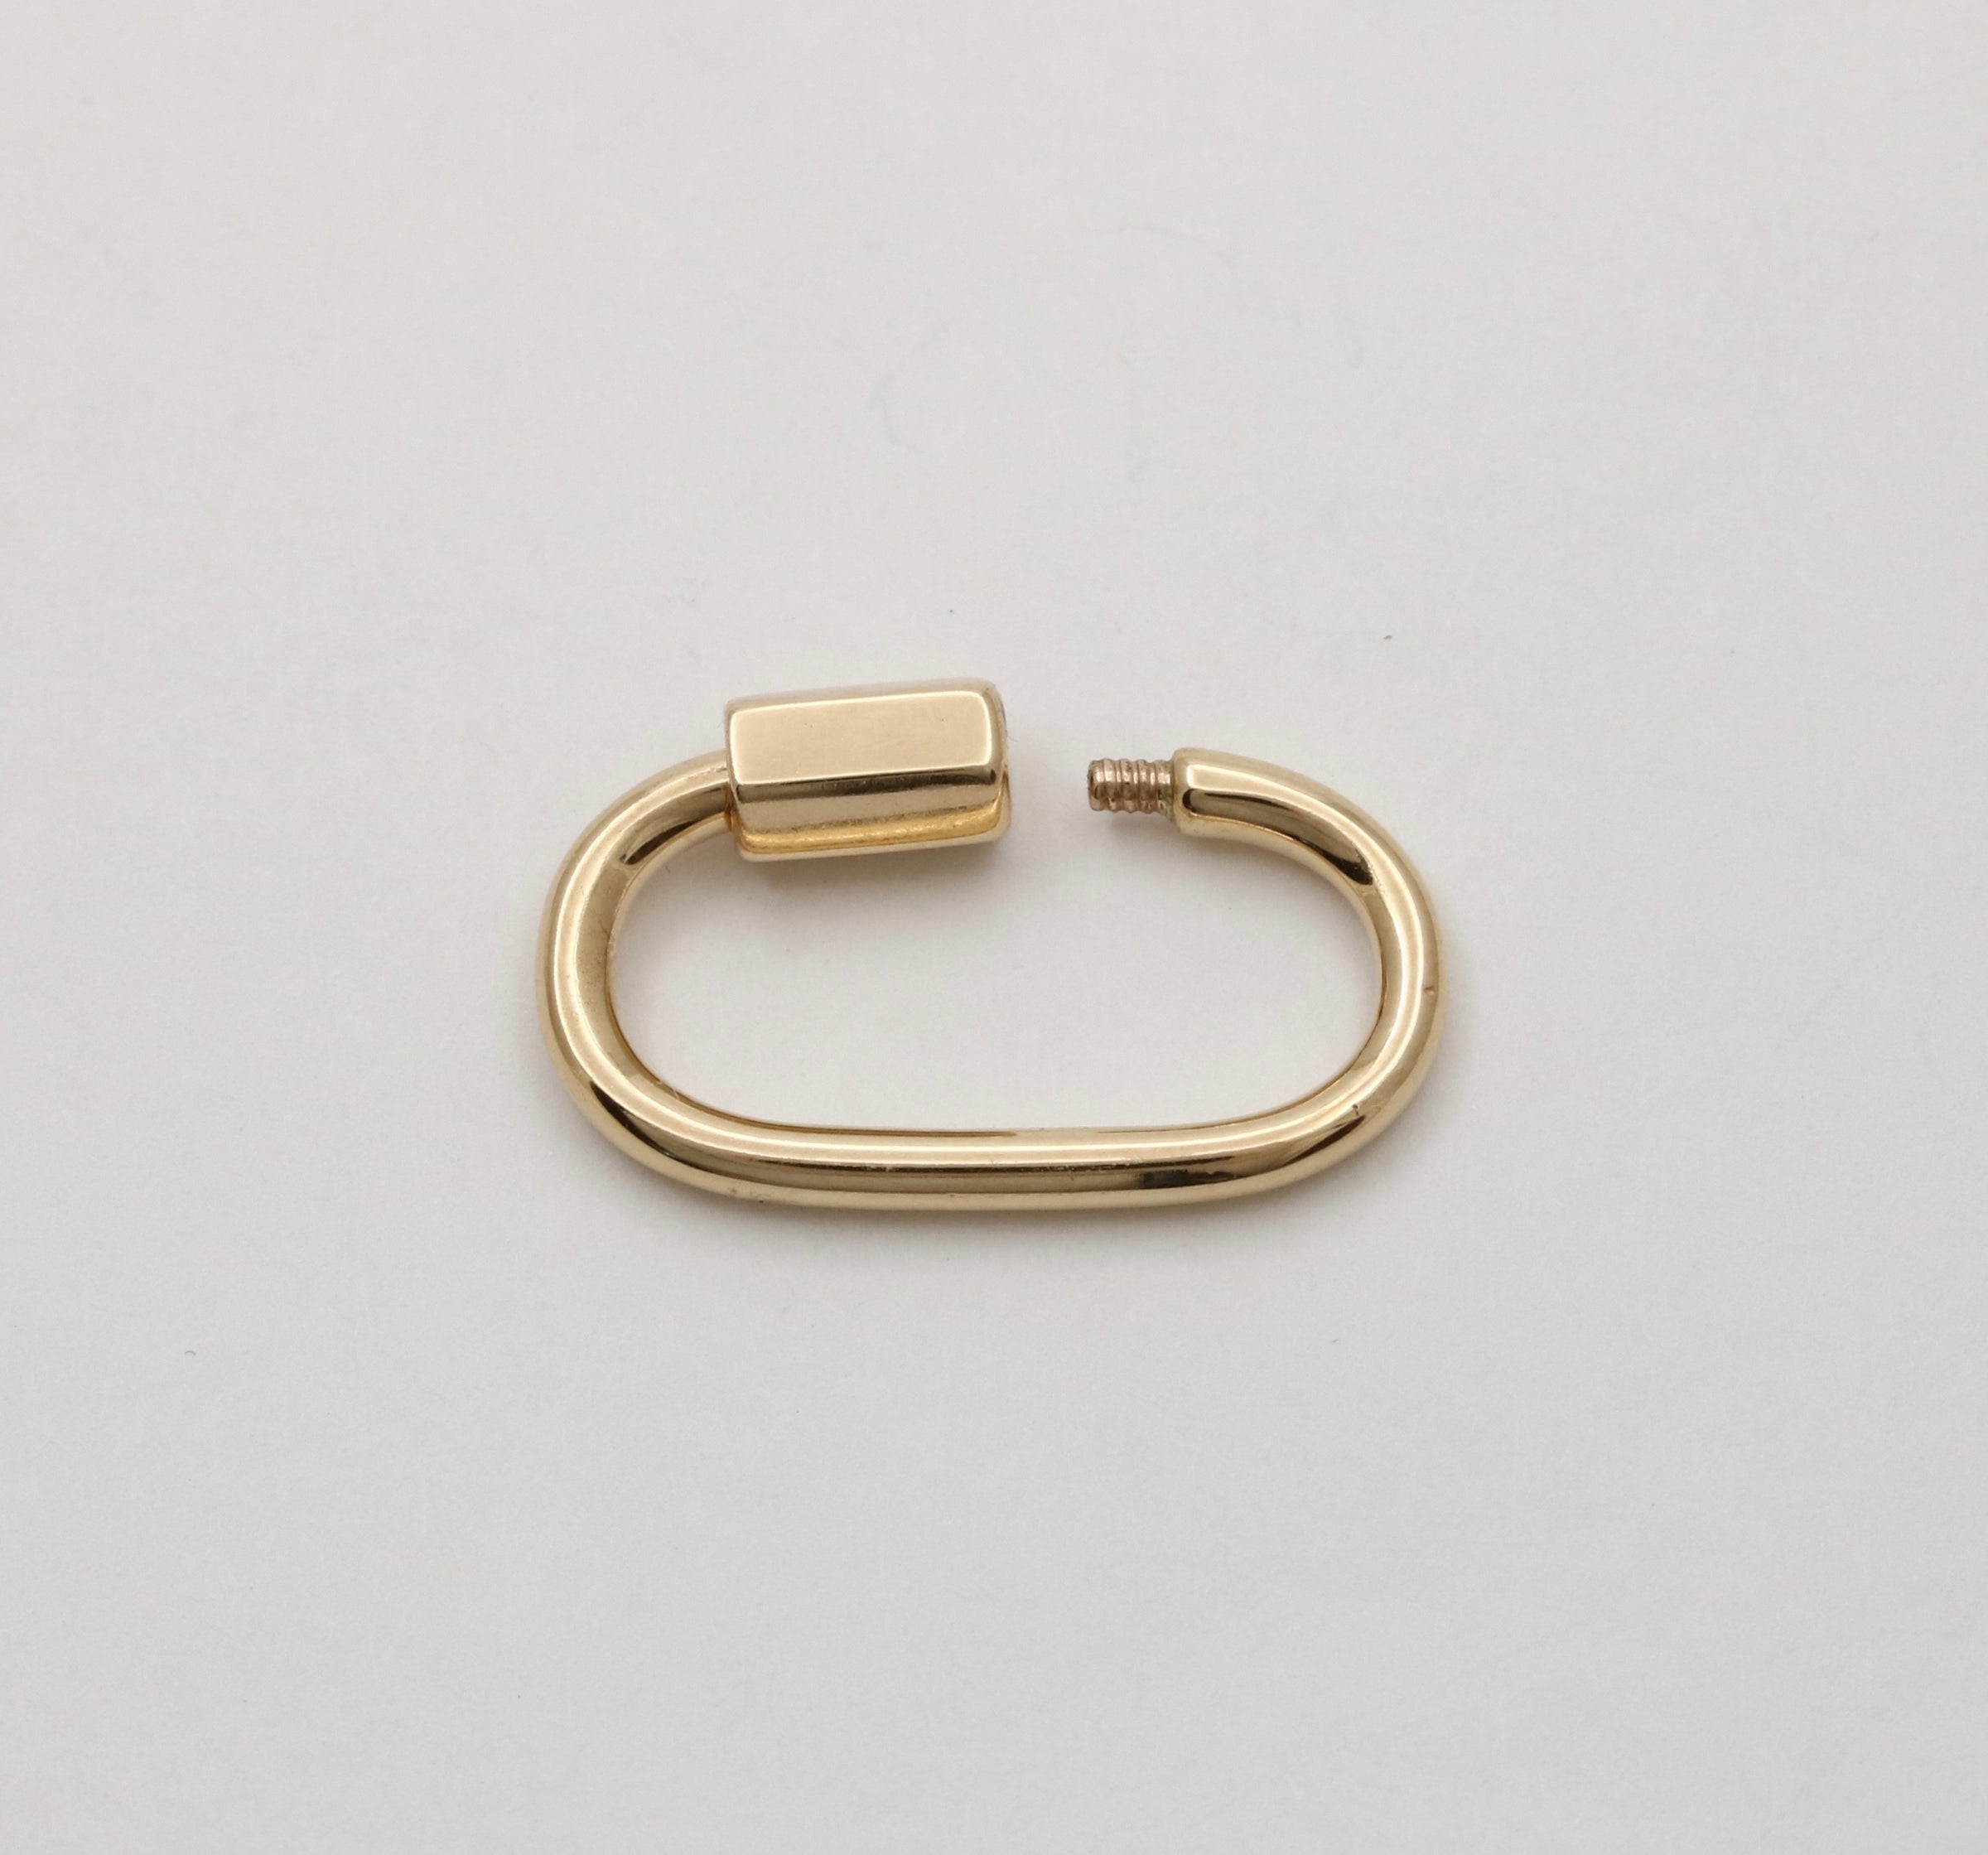 14k Solid Gold Oval Carabiner Lock Clasp,14k Solid Gold Carabiner Lock Clasp